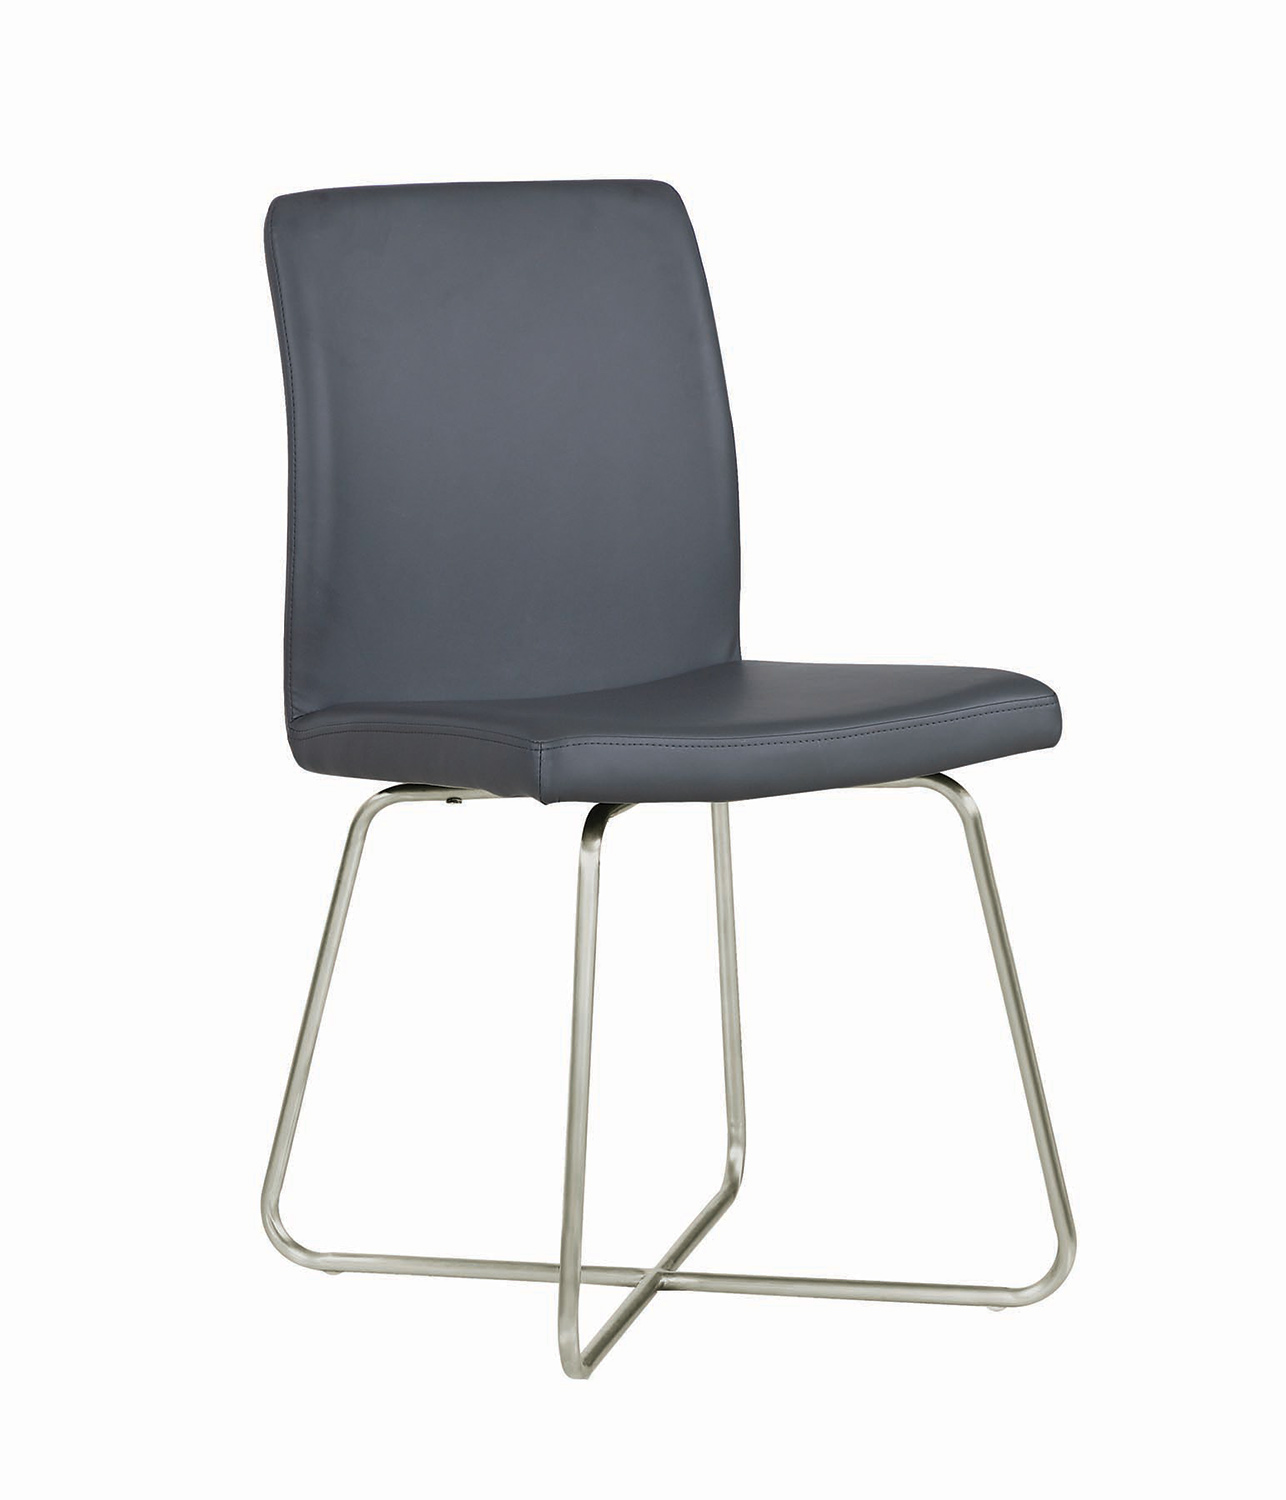 Coaster Michonne Dining Side Chair - Grey Leatherette